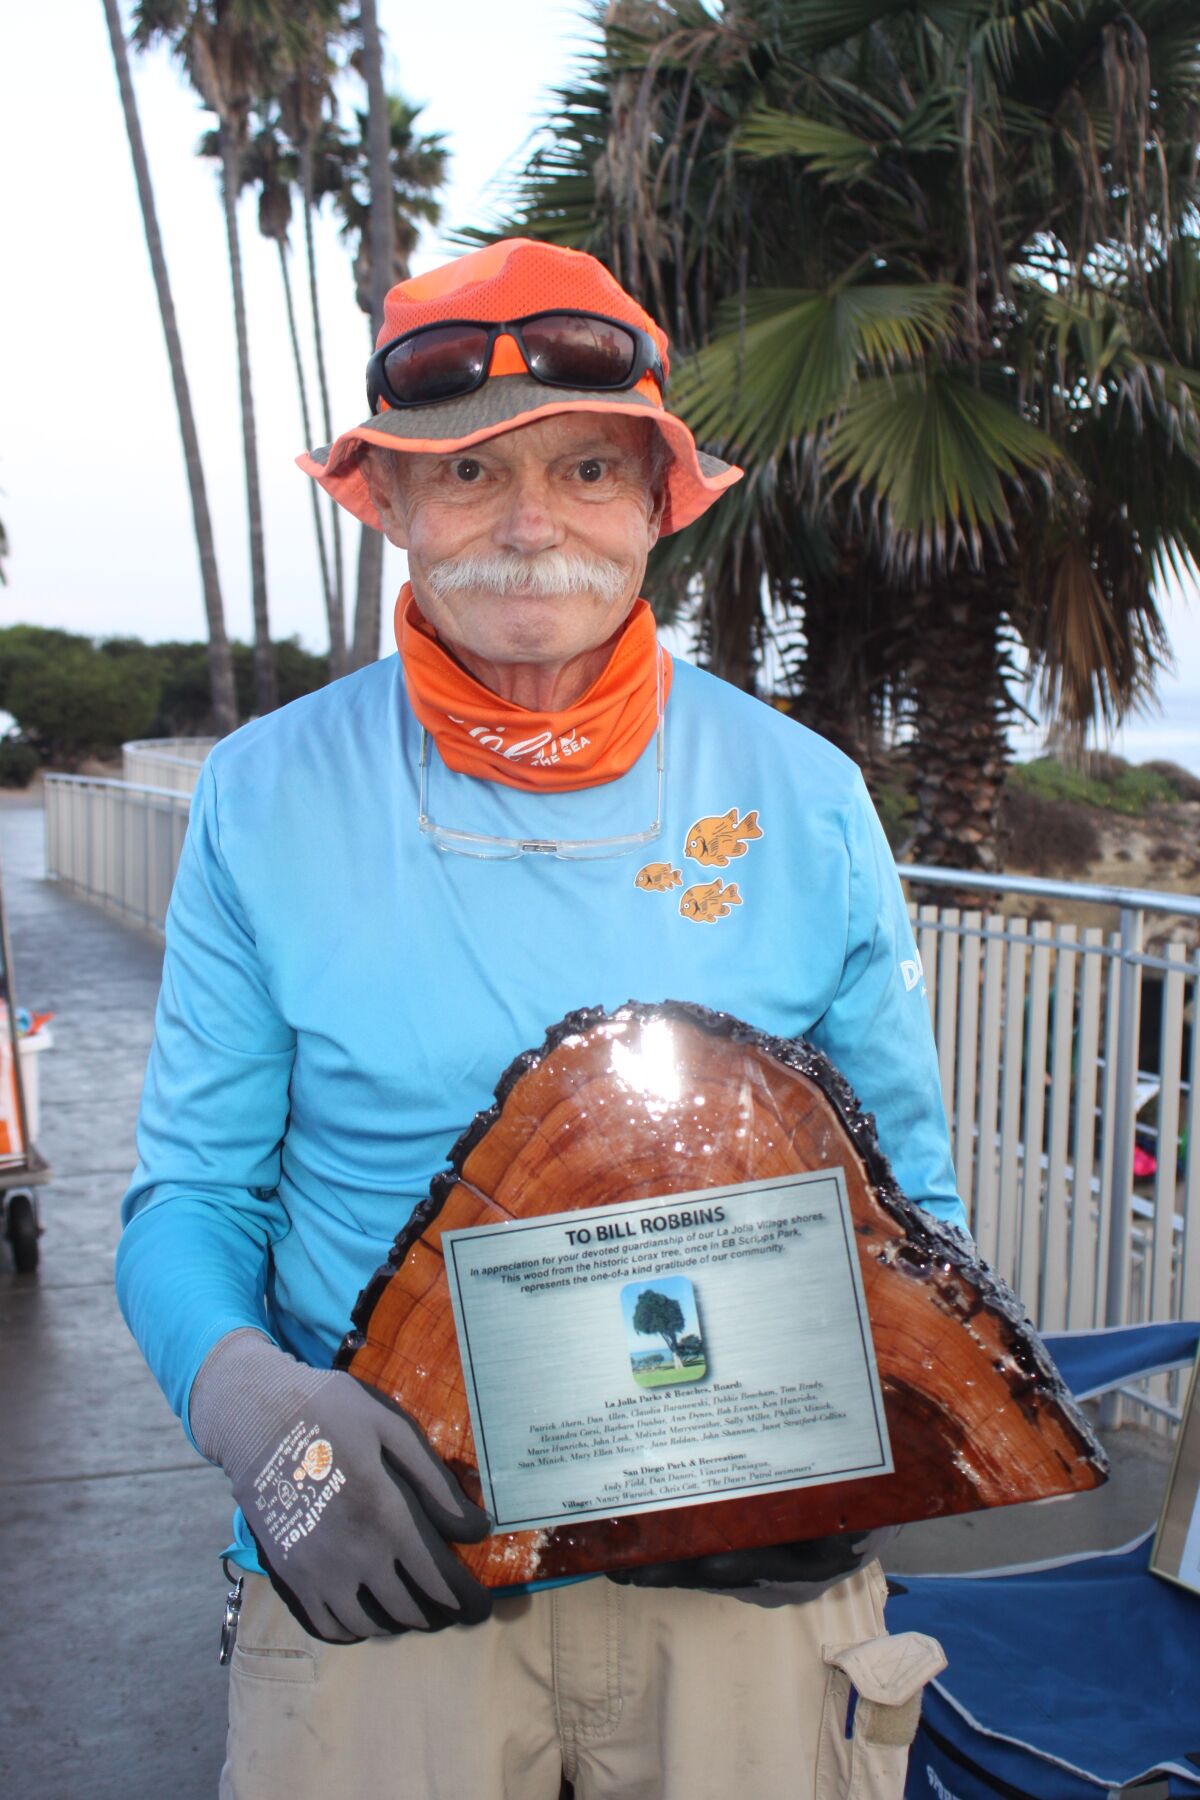 La Jolla resident Bill Robbins holds an award recognizing his community service around La Jolla Cove and Scripps Park.